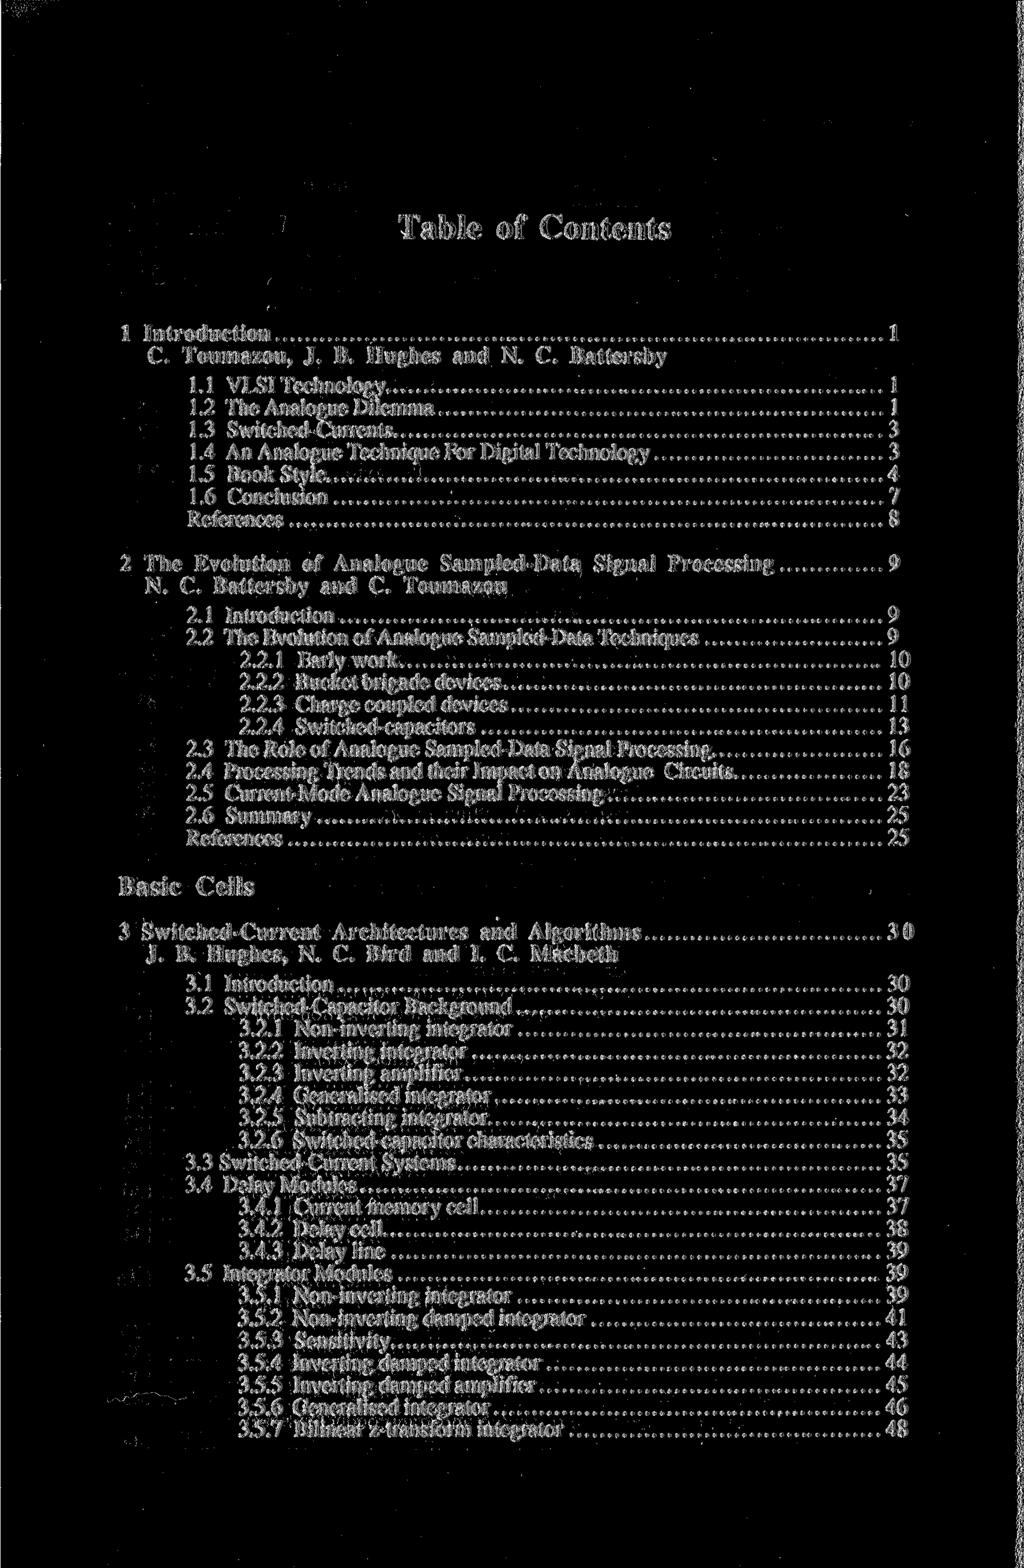 Table of Contents 1 Introduction 1 C. Toumazou, J. B. Hughes and N. С Battersby 1.1 VLSI Technology 1 1.2 The Analogue Dilemma 1 1.3 Switched-Currents 3 1.